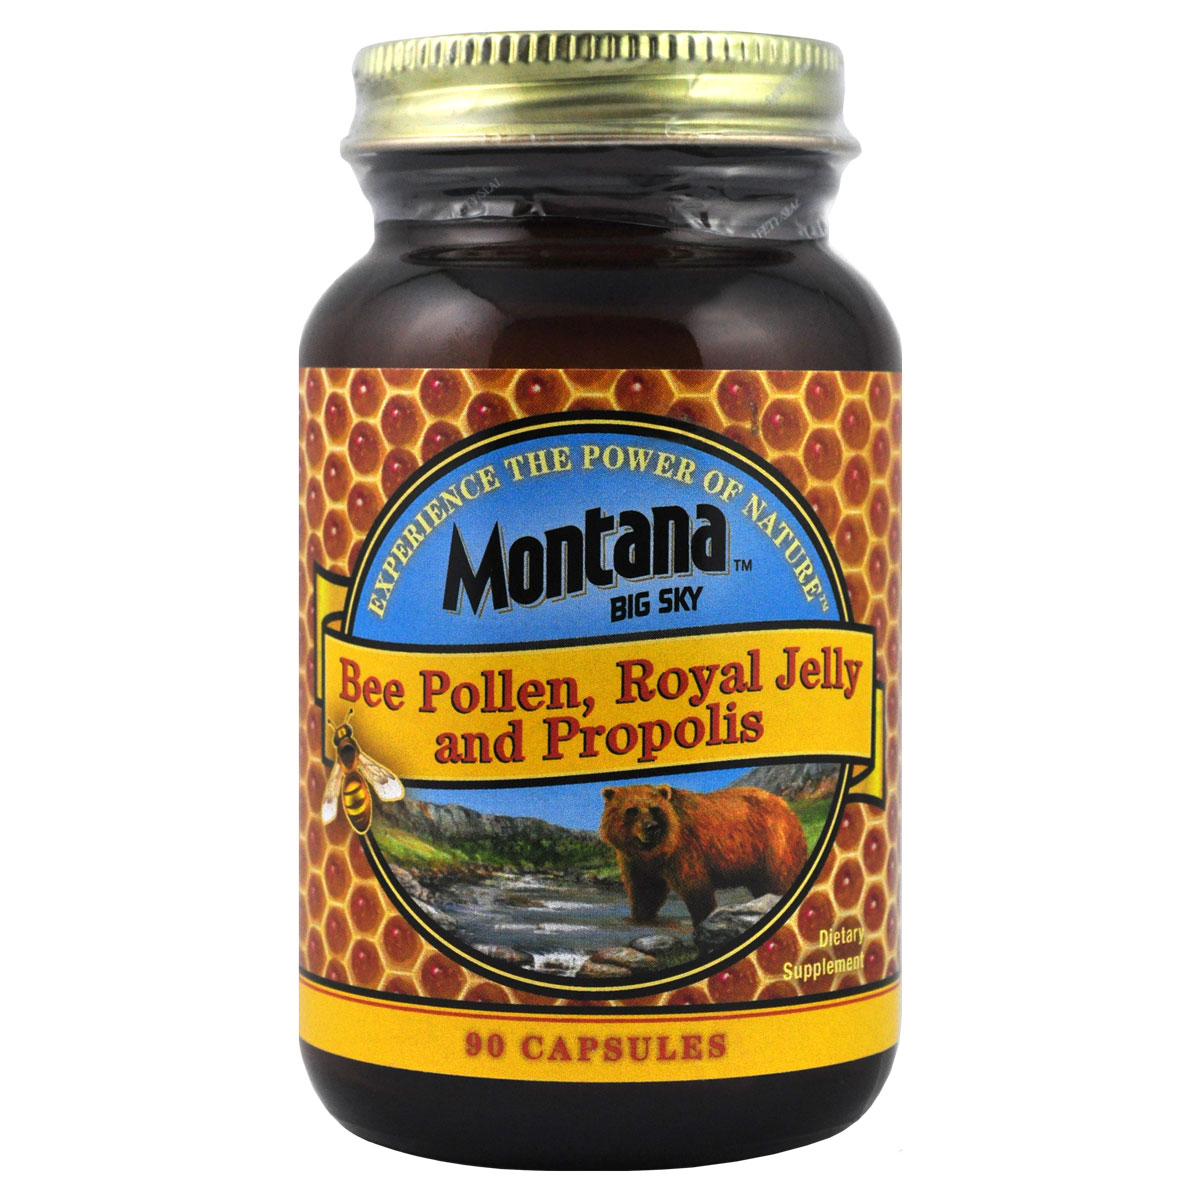 Bee Pollen, Royal Jelly & Propolis Supplement